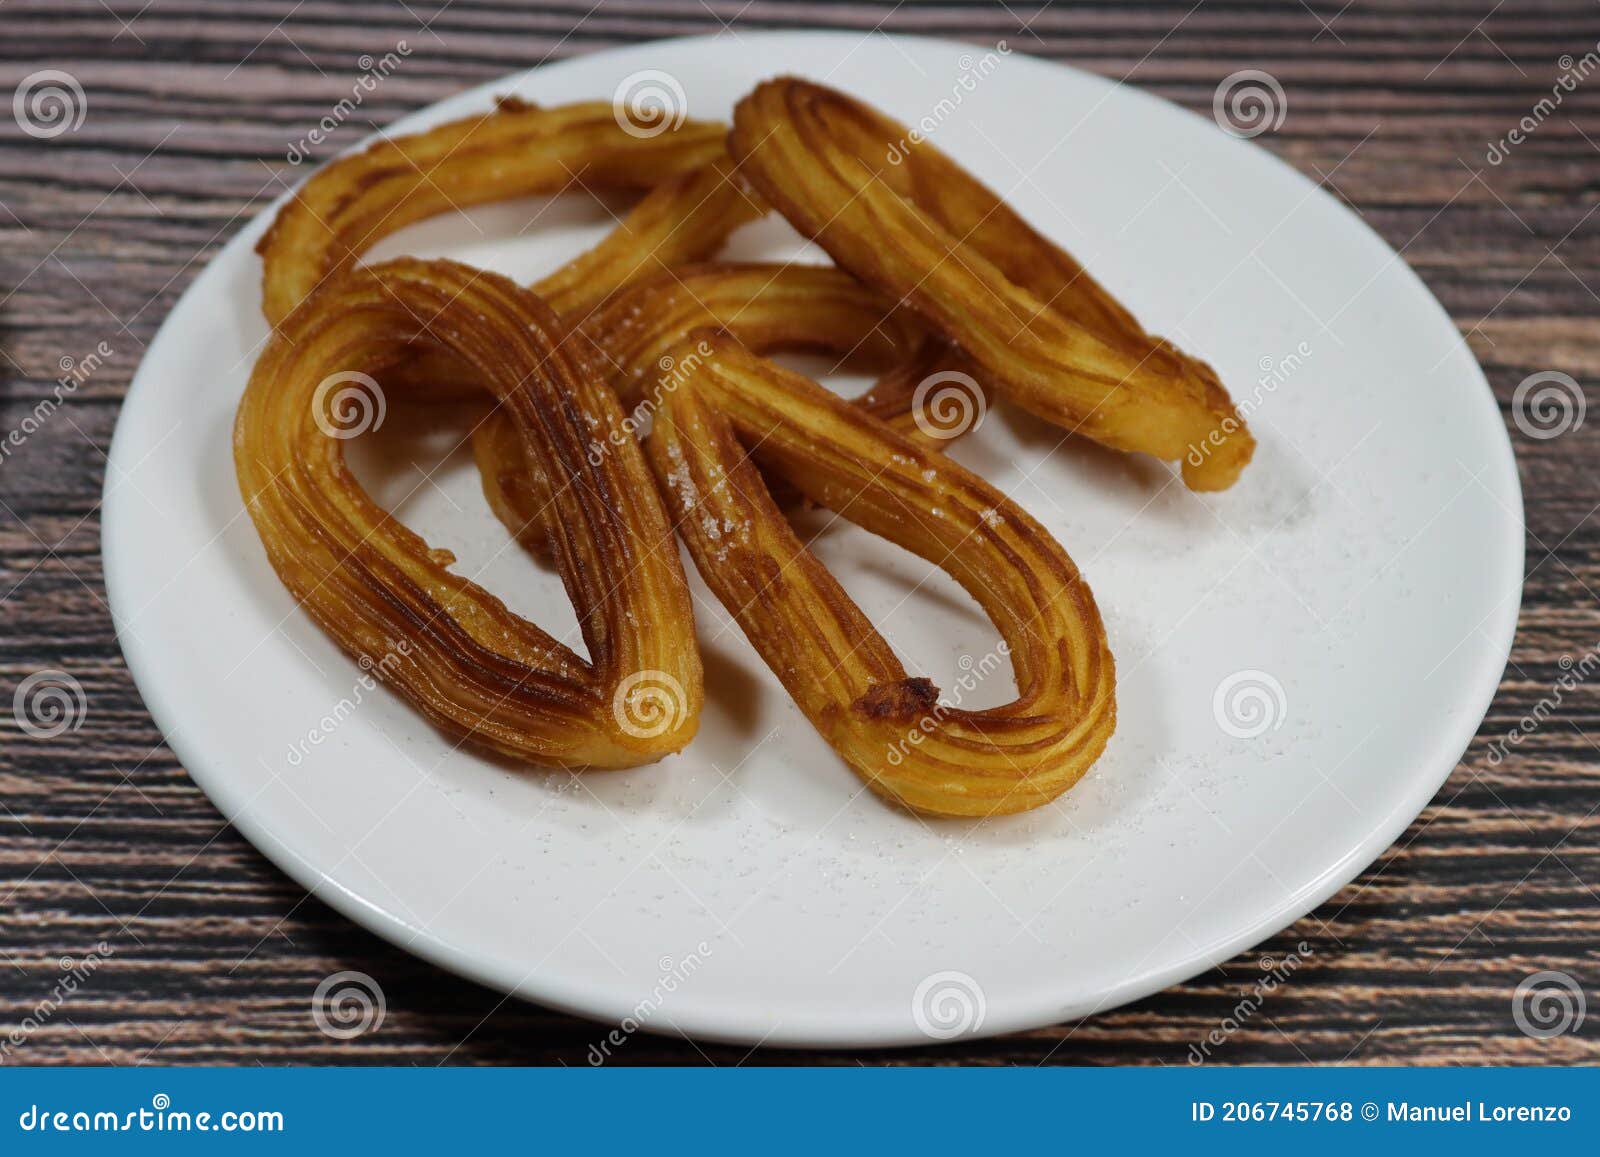 delicious typical spanish breakfast composed of flour oil salt fried